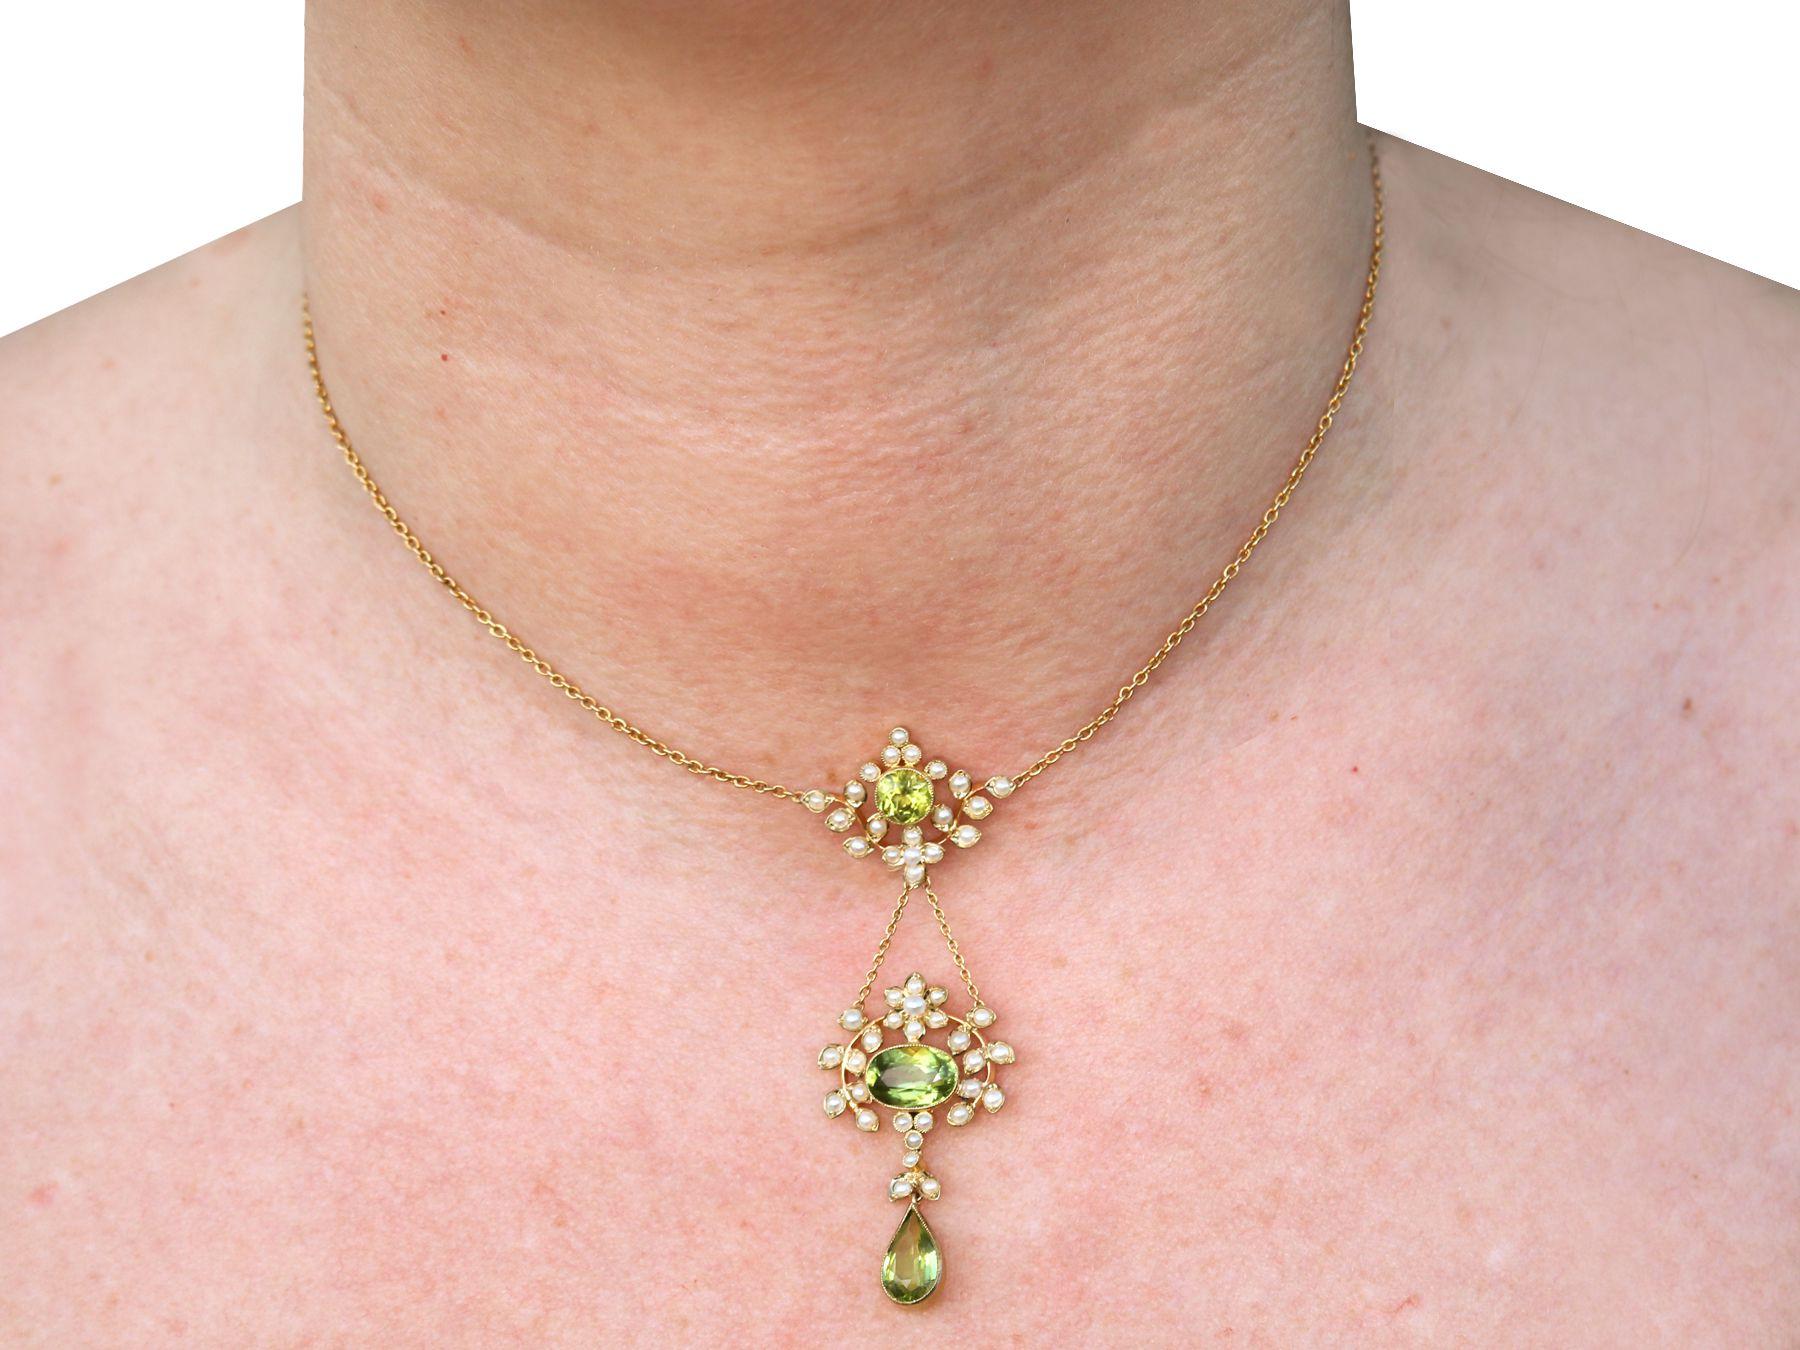 1920s Antique 3.43 Carat Peridot and Seed Pearl Yellow Gold Necklace In Excellent Condition For Sale In Jesmond, Newcastle Upon Tyne